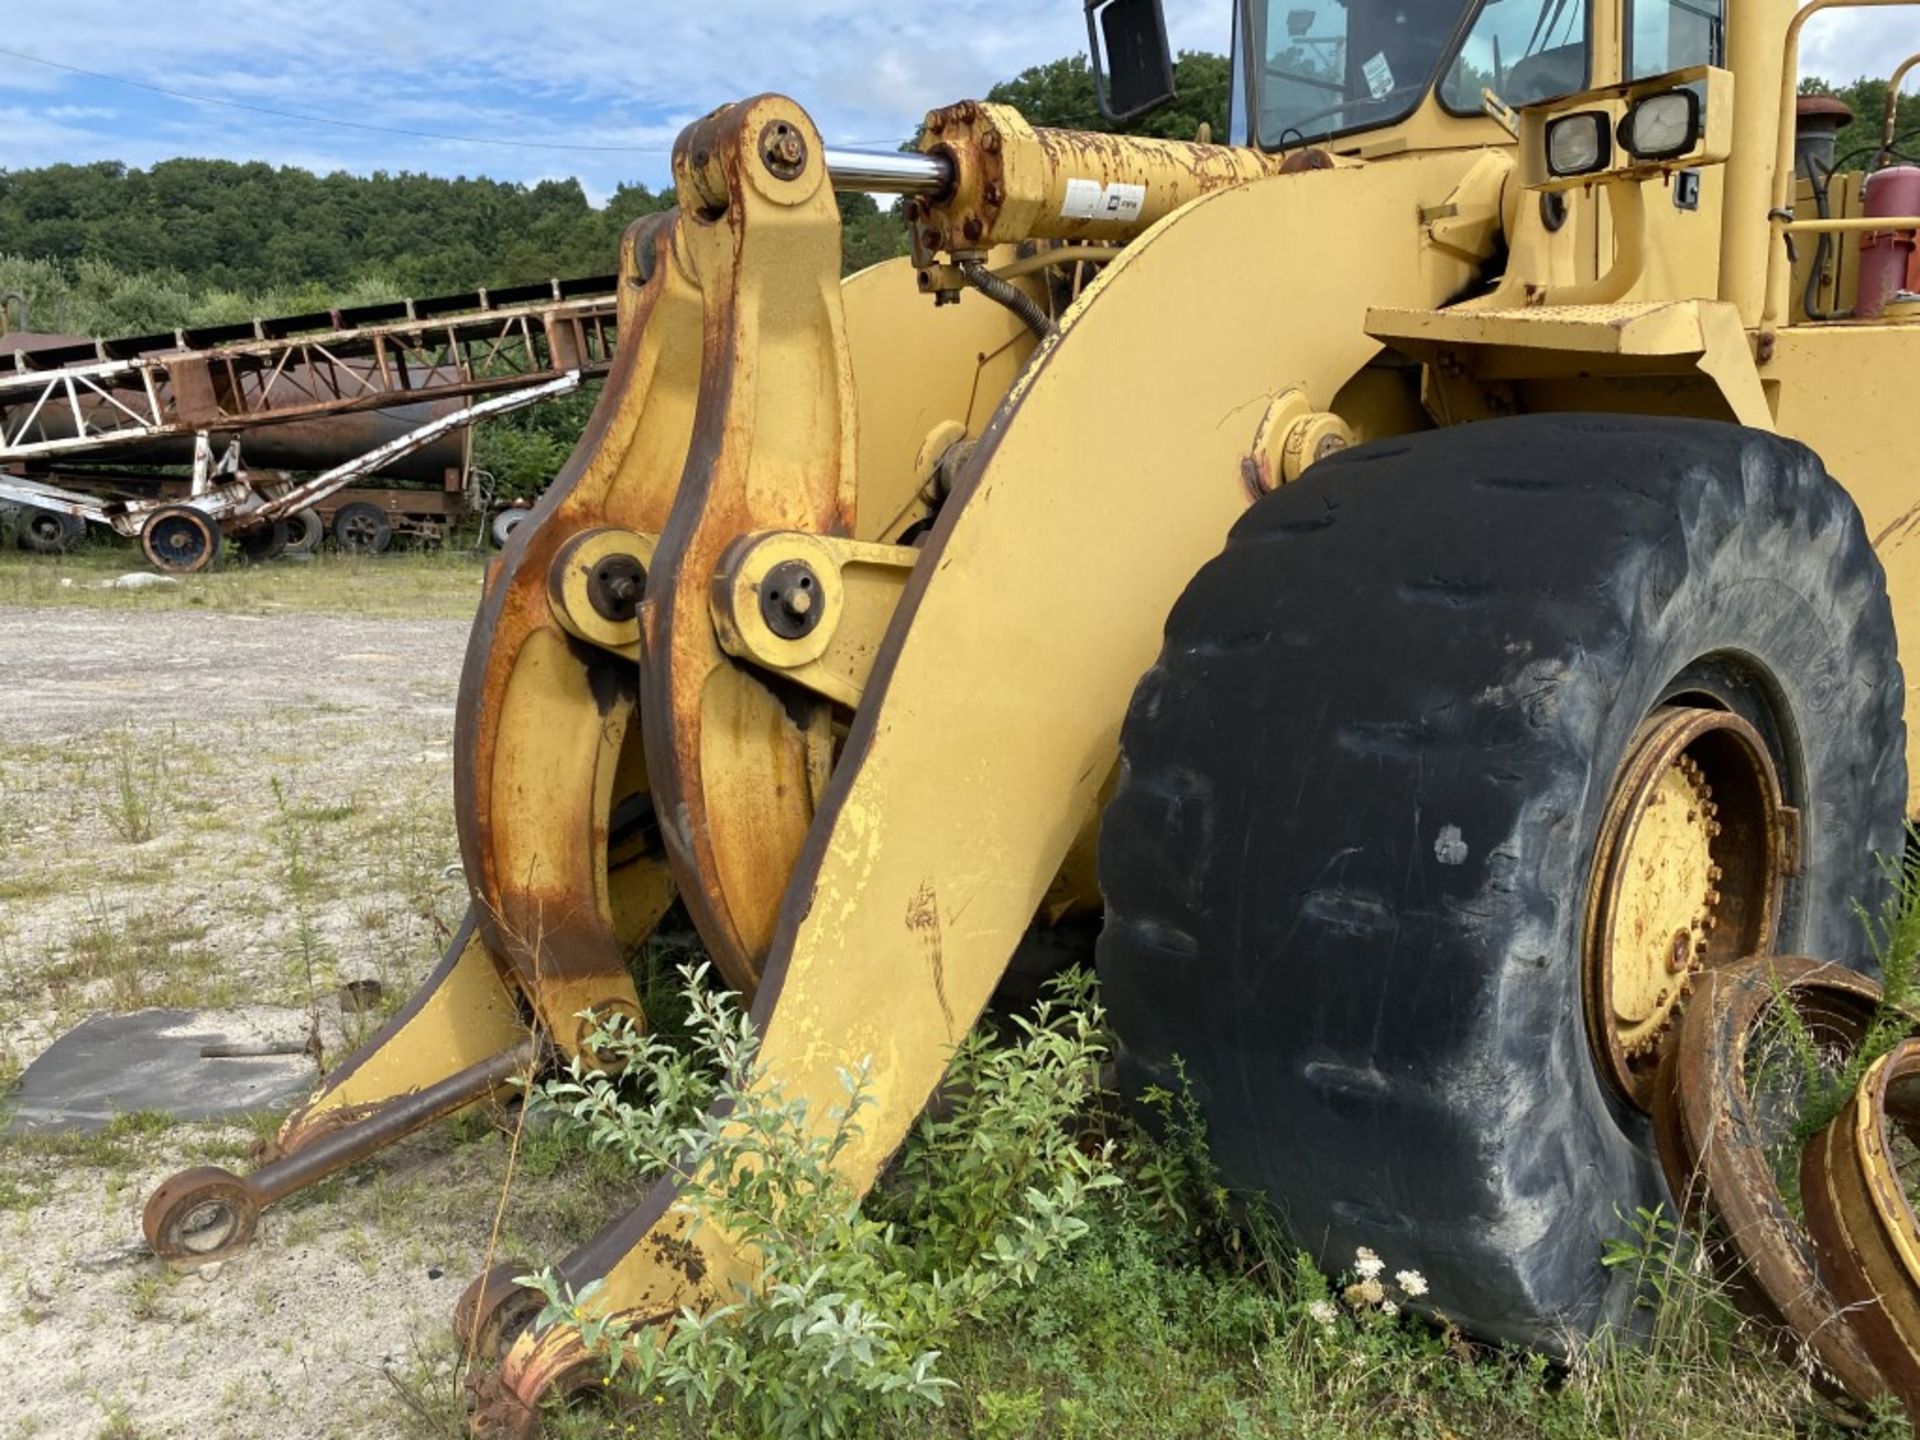 1998 CATERPILLAR 988F ARTICULATED WHEEL LOADER, ENCLOSED CAB, S/N: 8Y601152, 39,457 HOURS, PARTS - Image 8 of 18